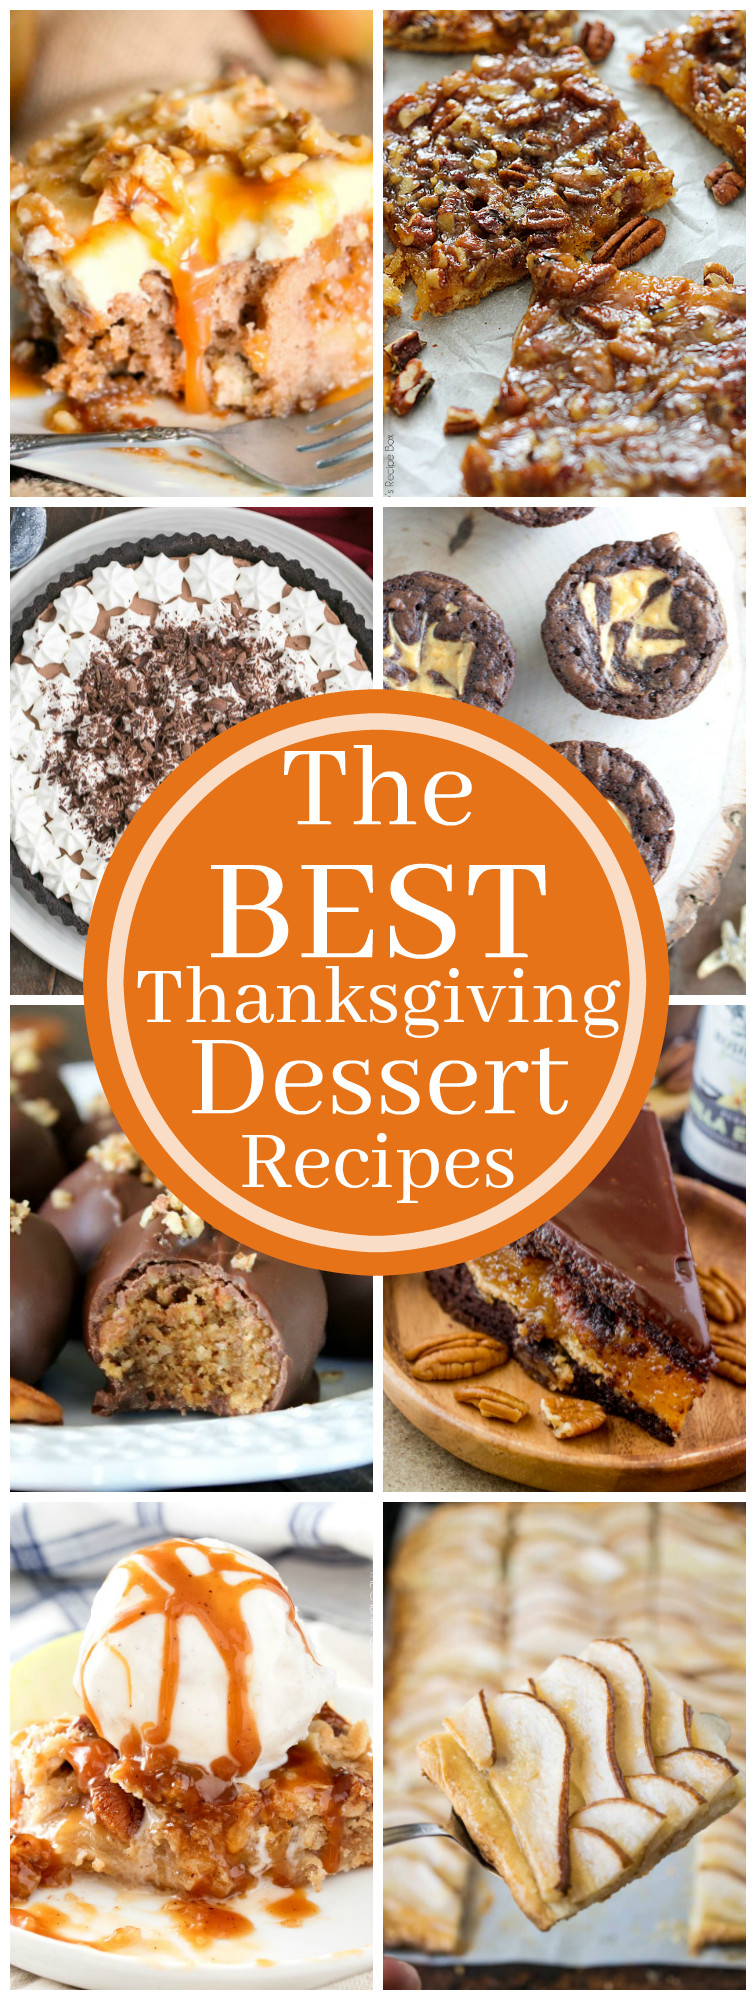 Thanksgiving Chocolate Desserts
 The Best Thanksgiving Desserts Savory Experiments